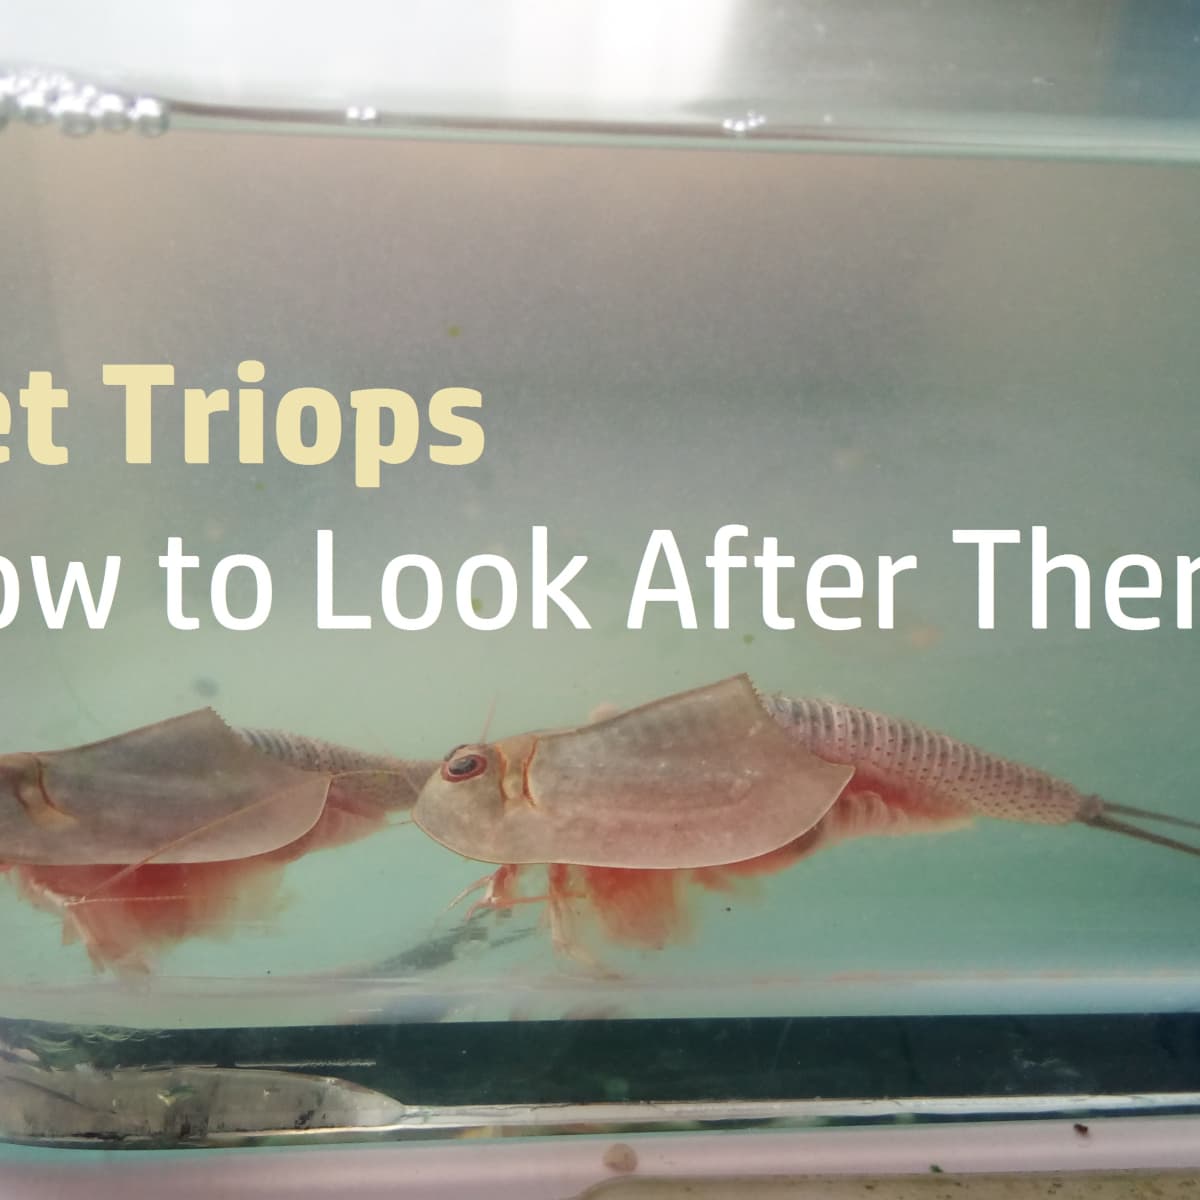 Triops as Pets: How to Raise, Feed, Breed, and Care for Them - PetHelpful